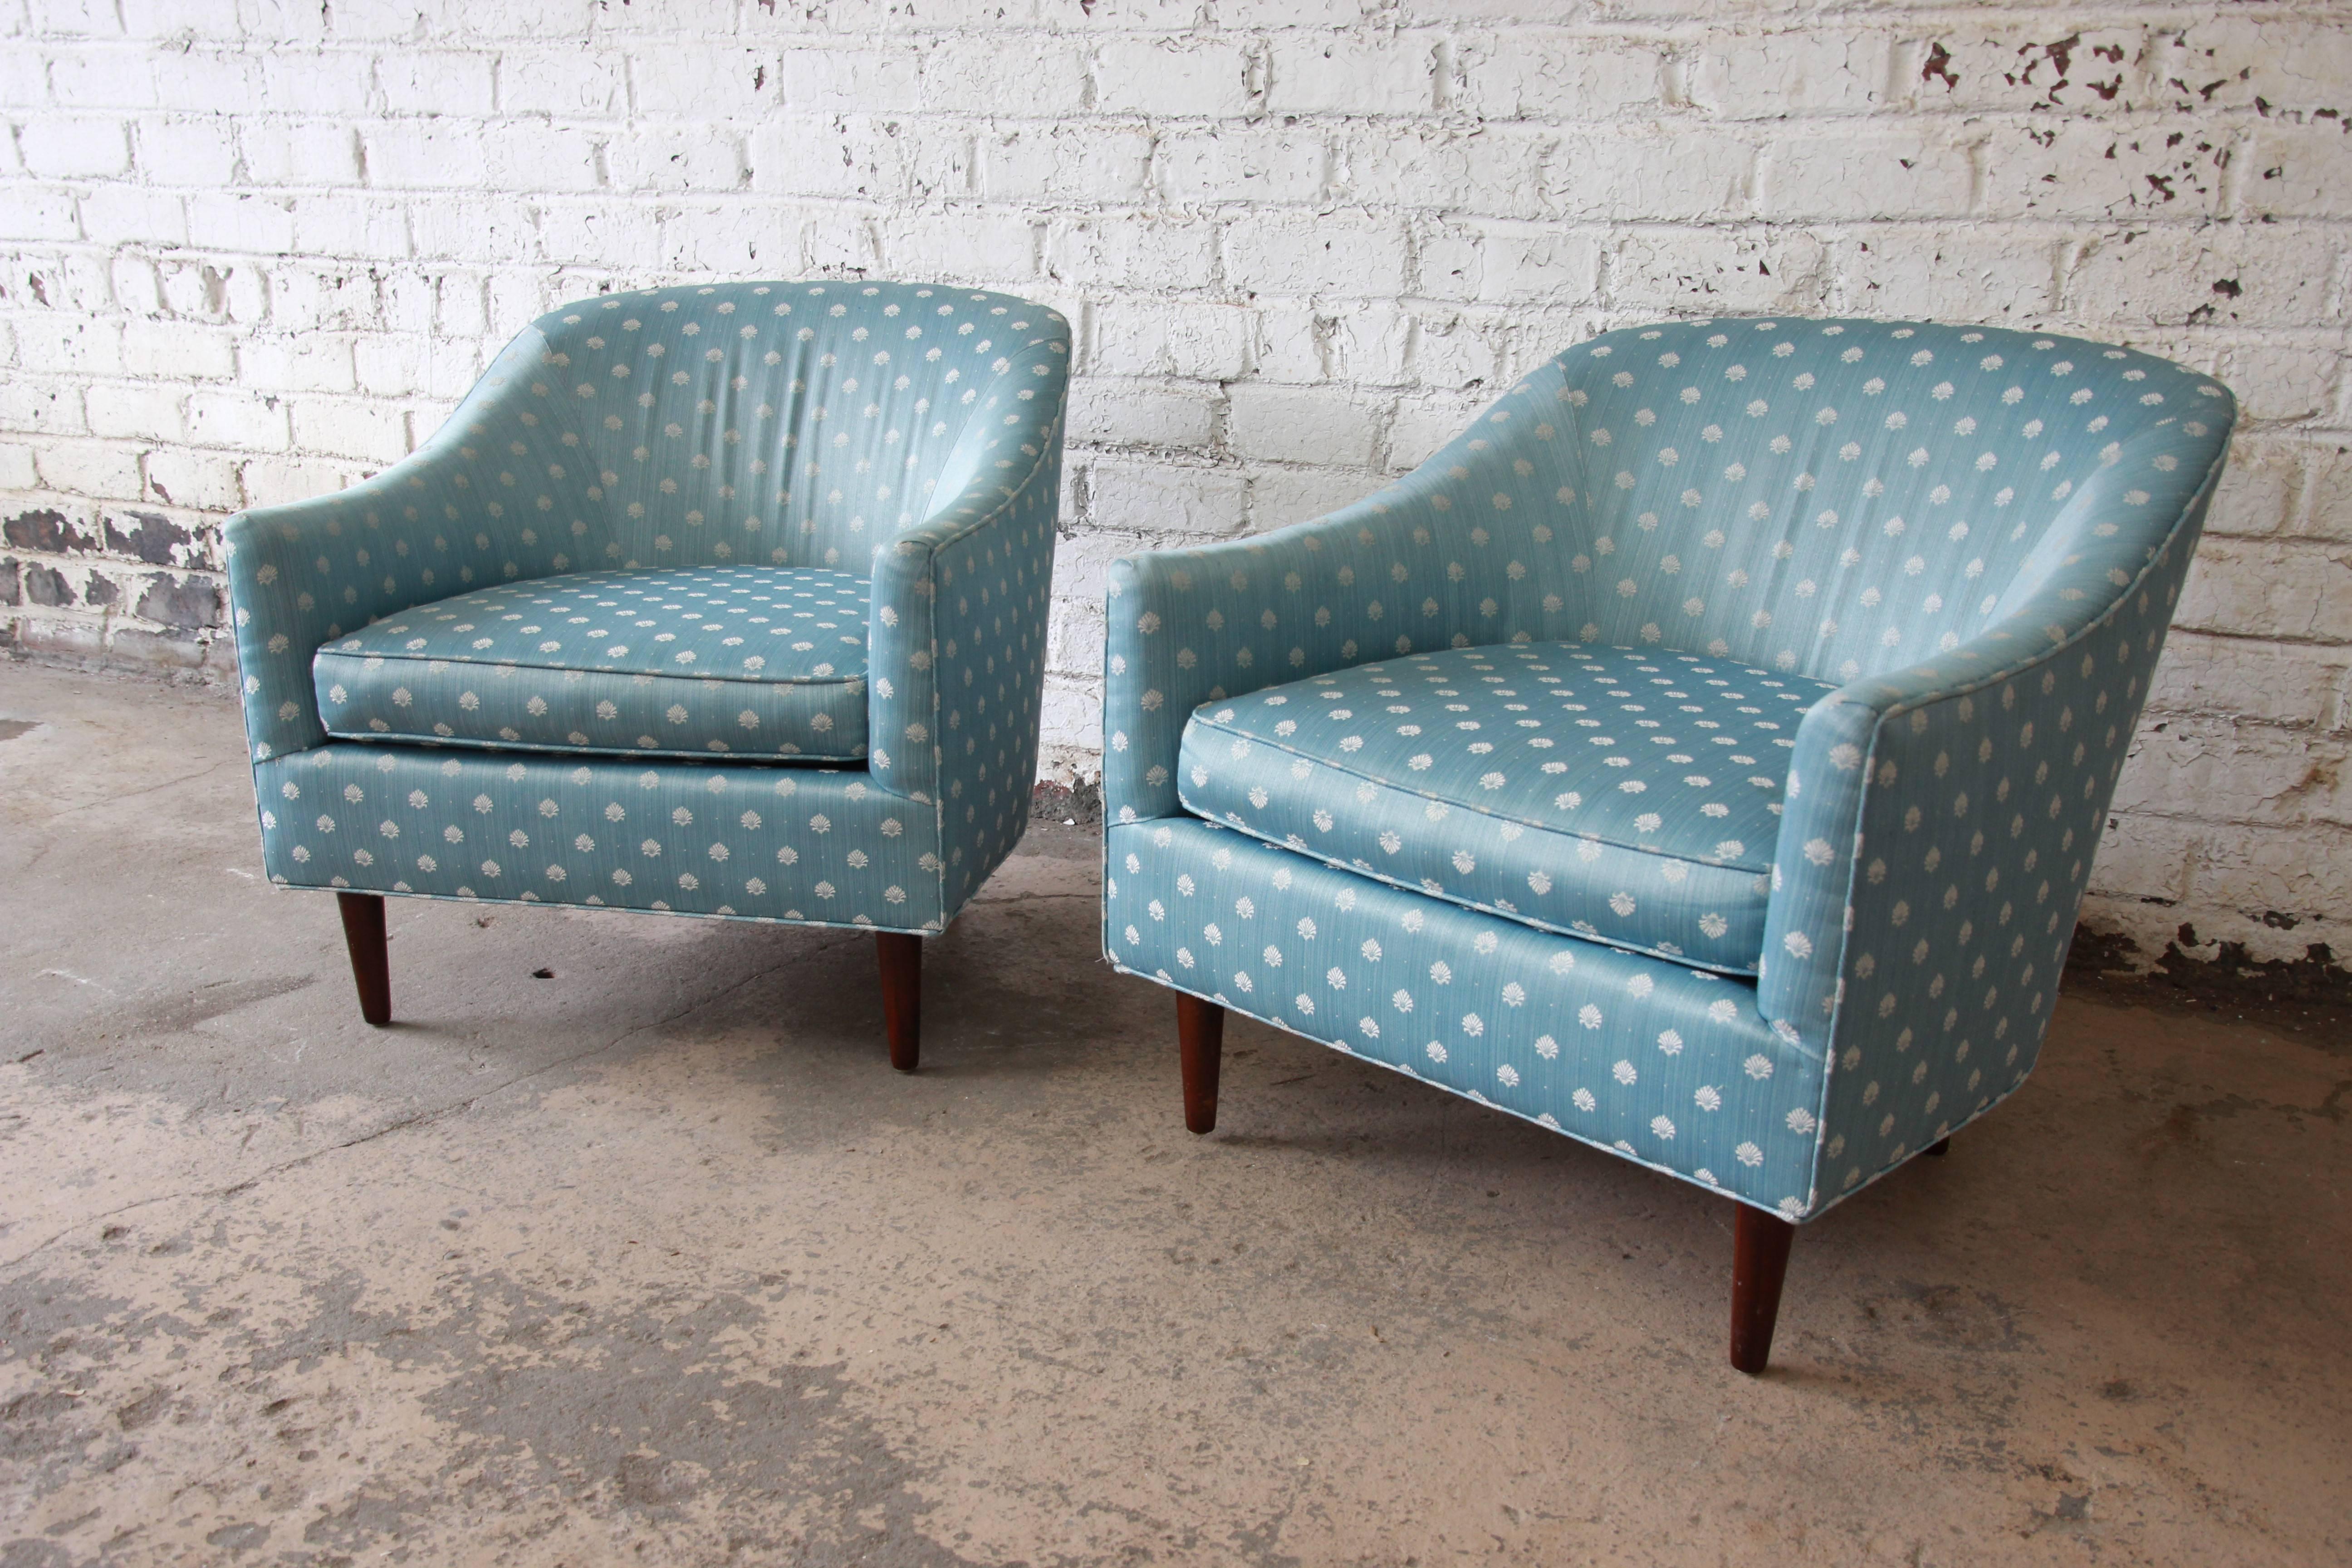 A gorgeous pair of Mid-Century Modern barrel back club chairs in the style of Milo Baughman. The chairs feature beautiful light blue and ivory upholstery and stylish solid walnut tapered legs. A very comfortable pair in good vintage